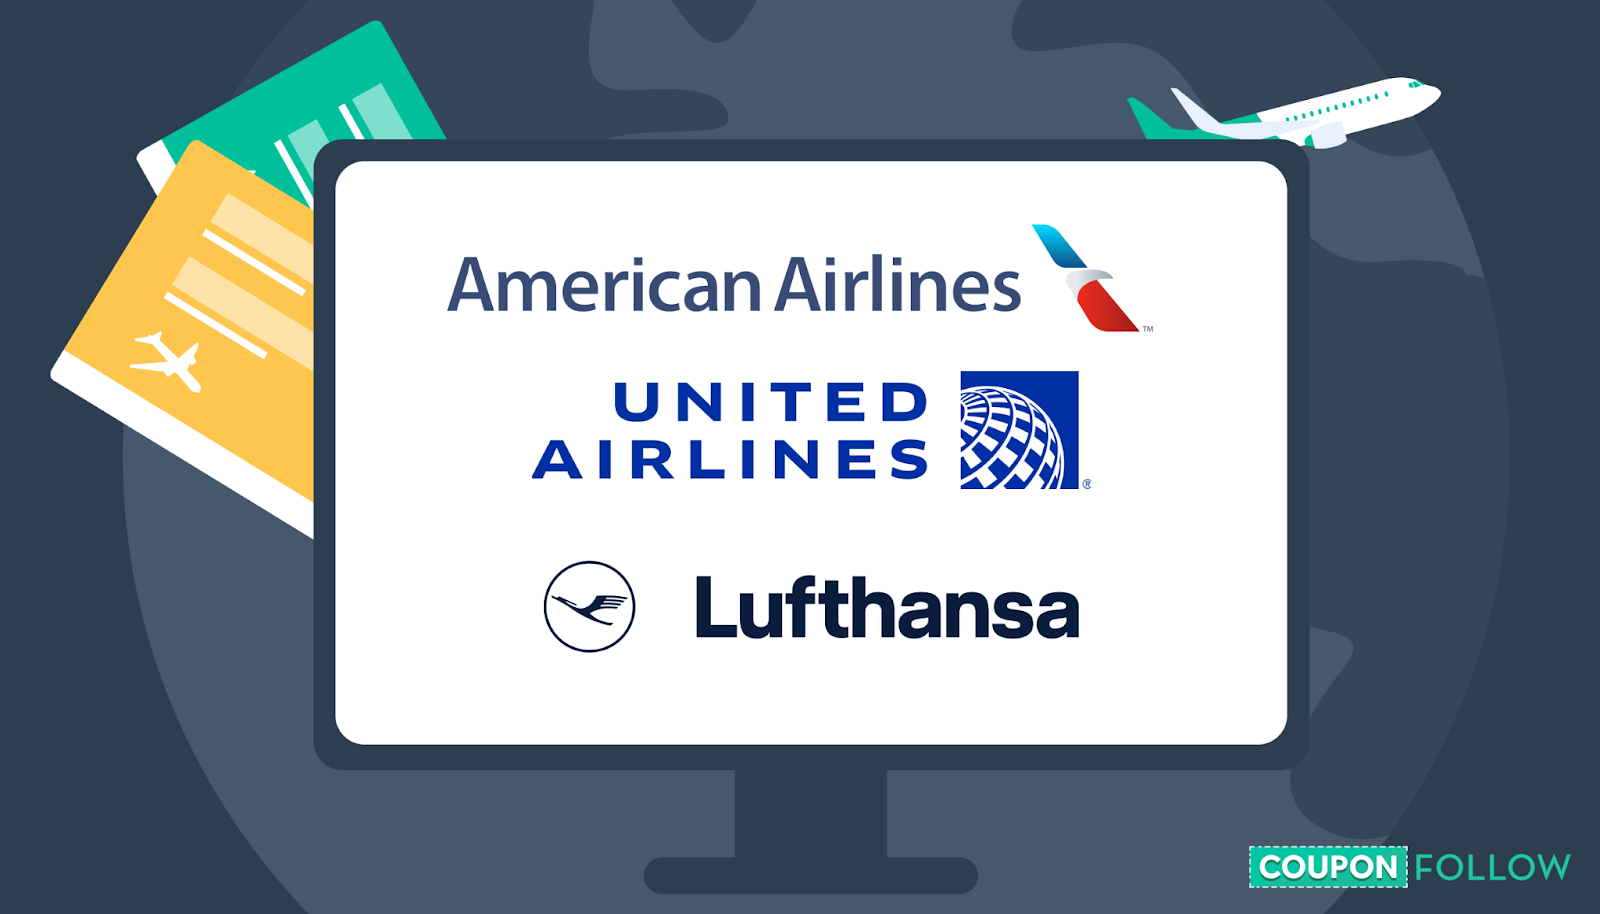 Illustration of airline logos that offer discounts